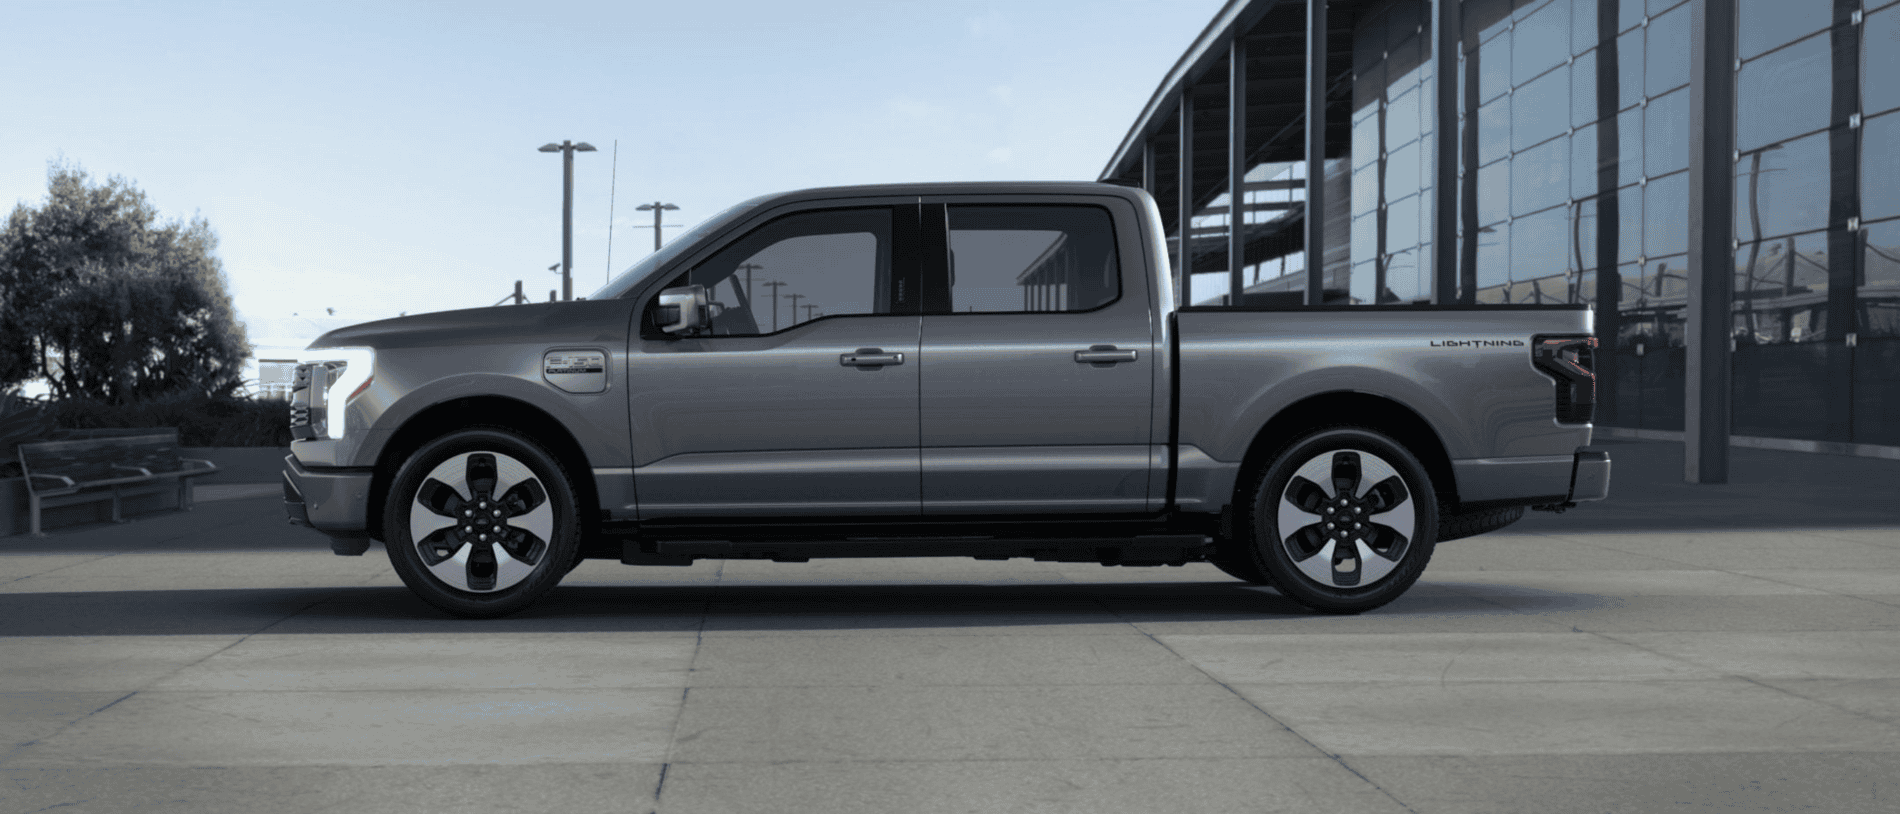 Ford F-150 Lightning Too early to talk colors for 2022 F-150 Lightning? Carbonized Gray